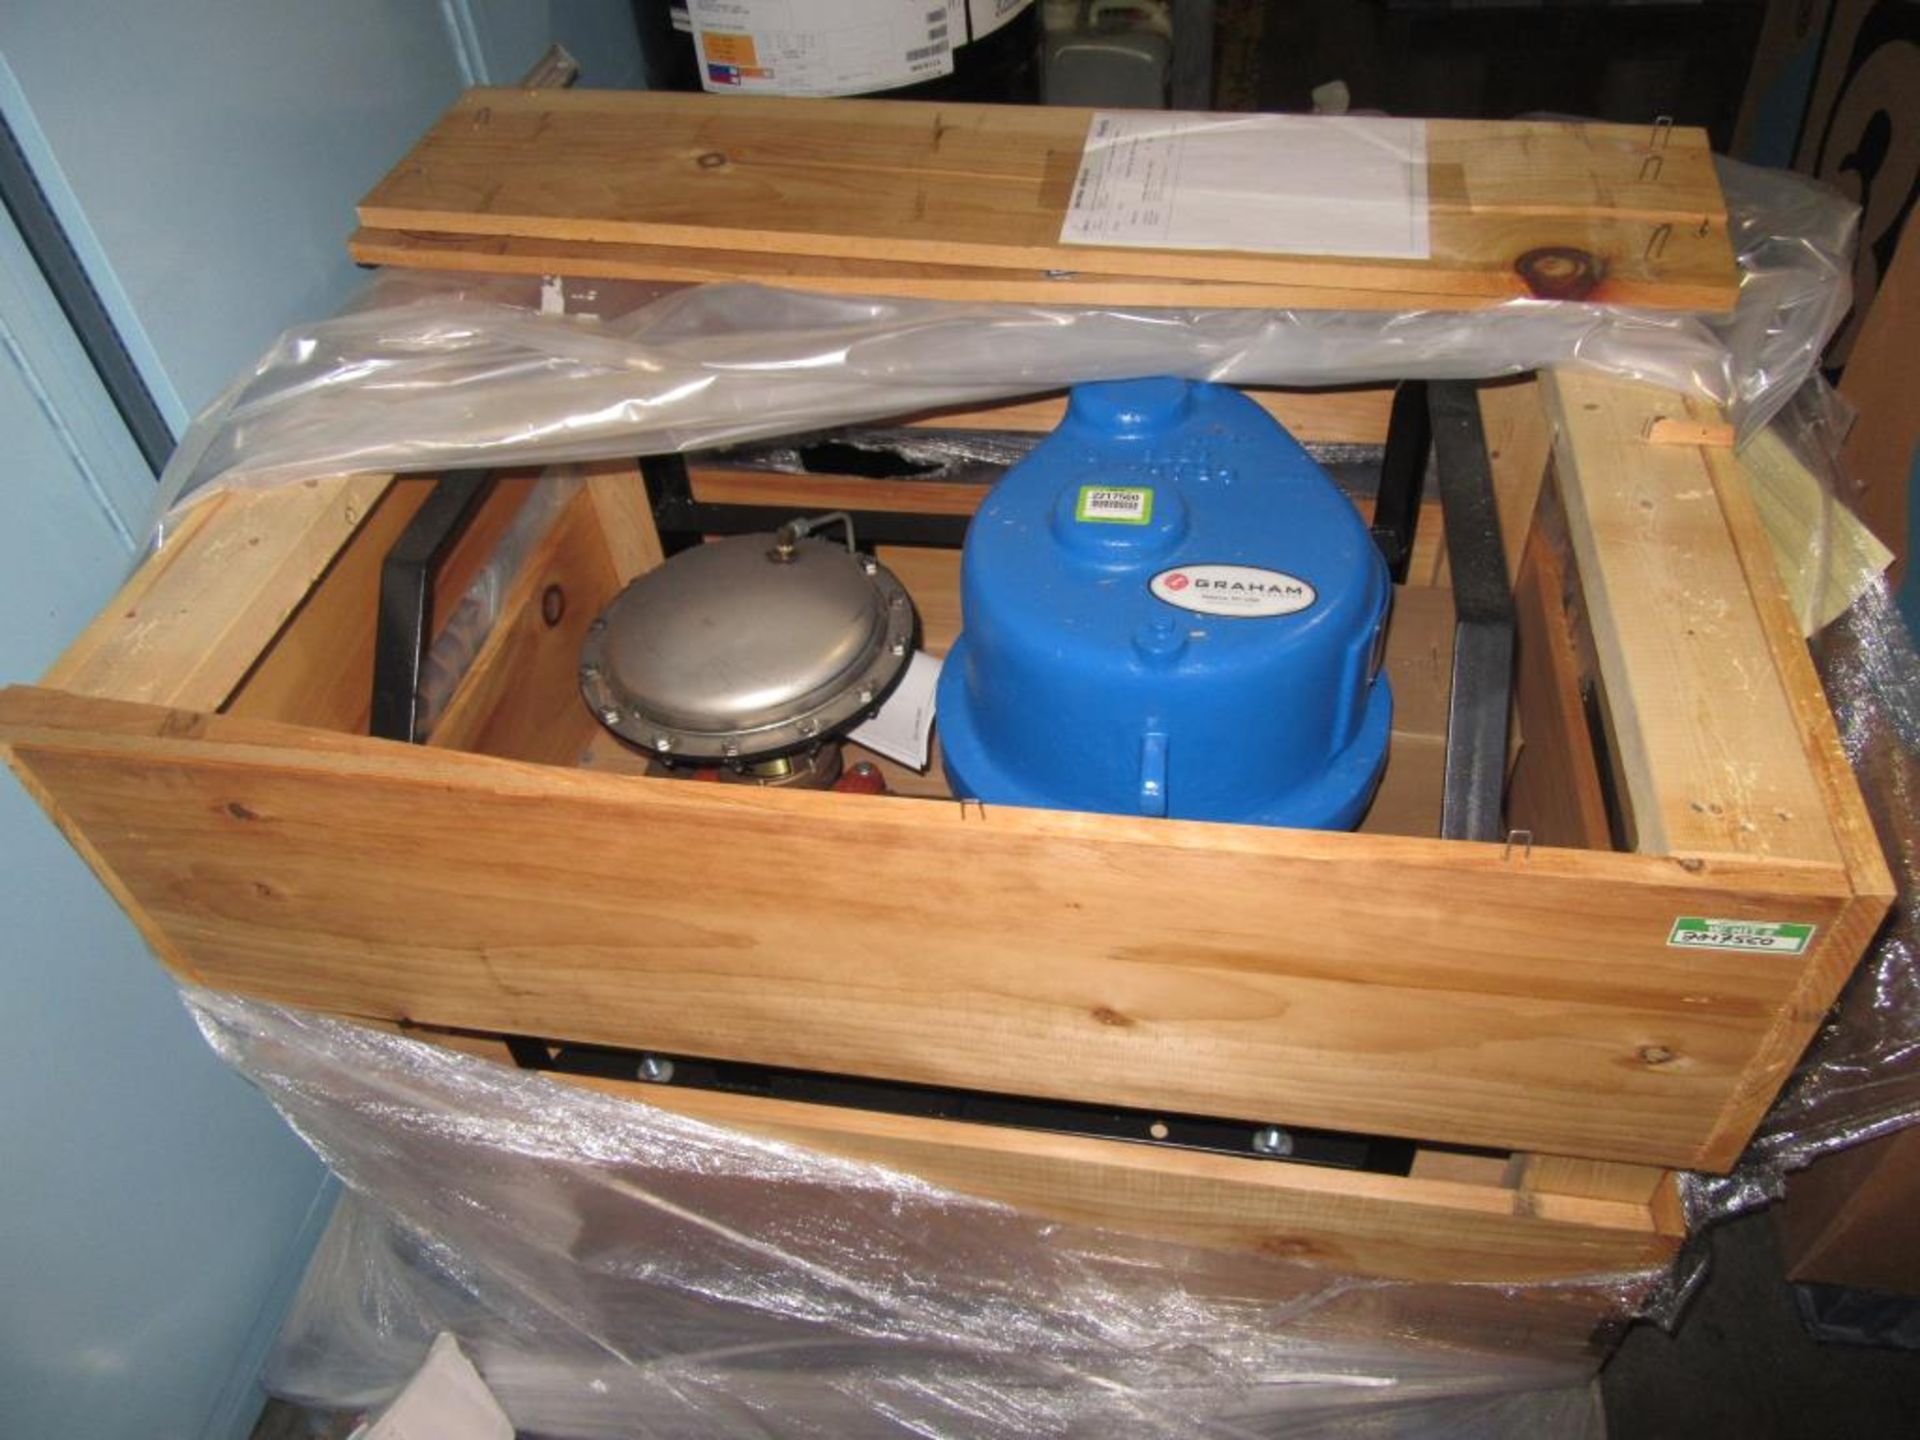 Graham MM-60 Hot Water Heaters; Micro-Mix II Hot Water Heater in Crate. HIT# 2217560. Loc: - Image 3 of 3